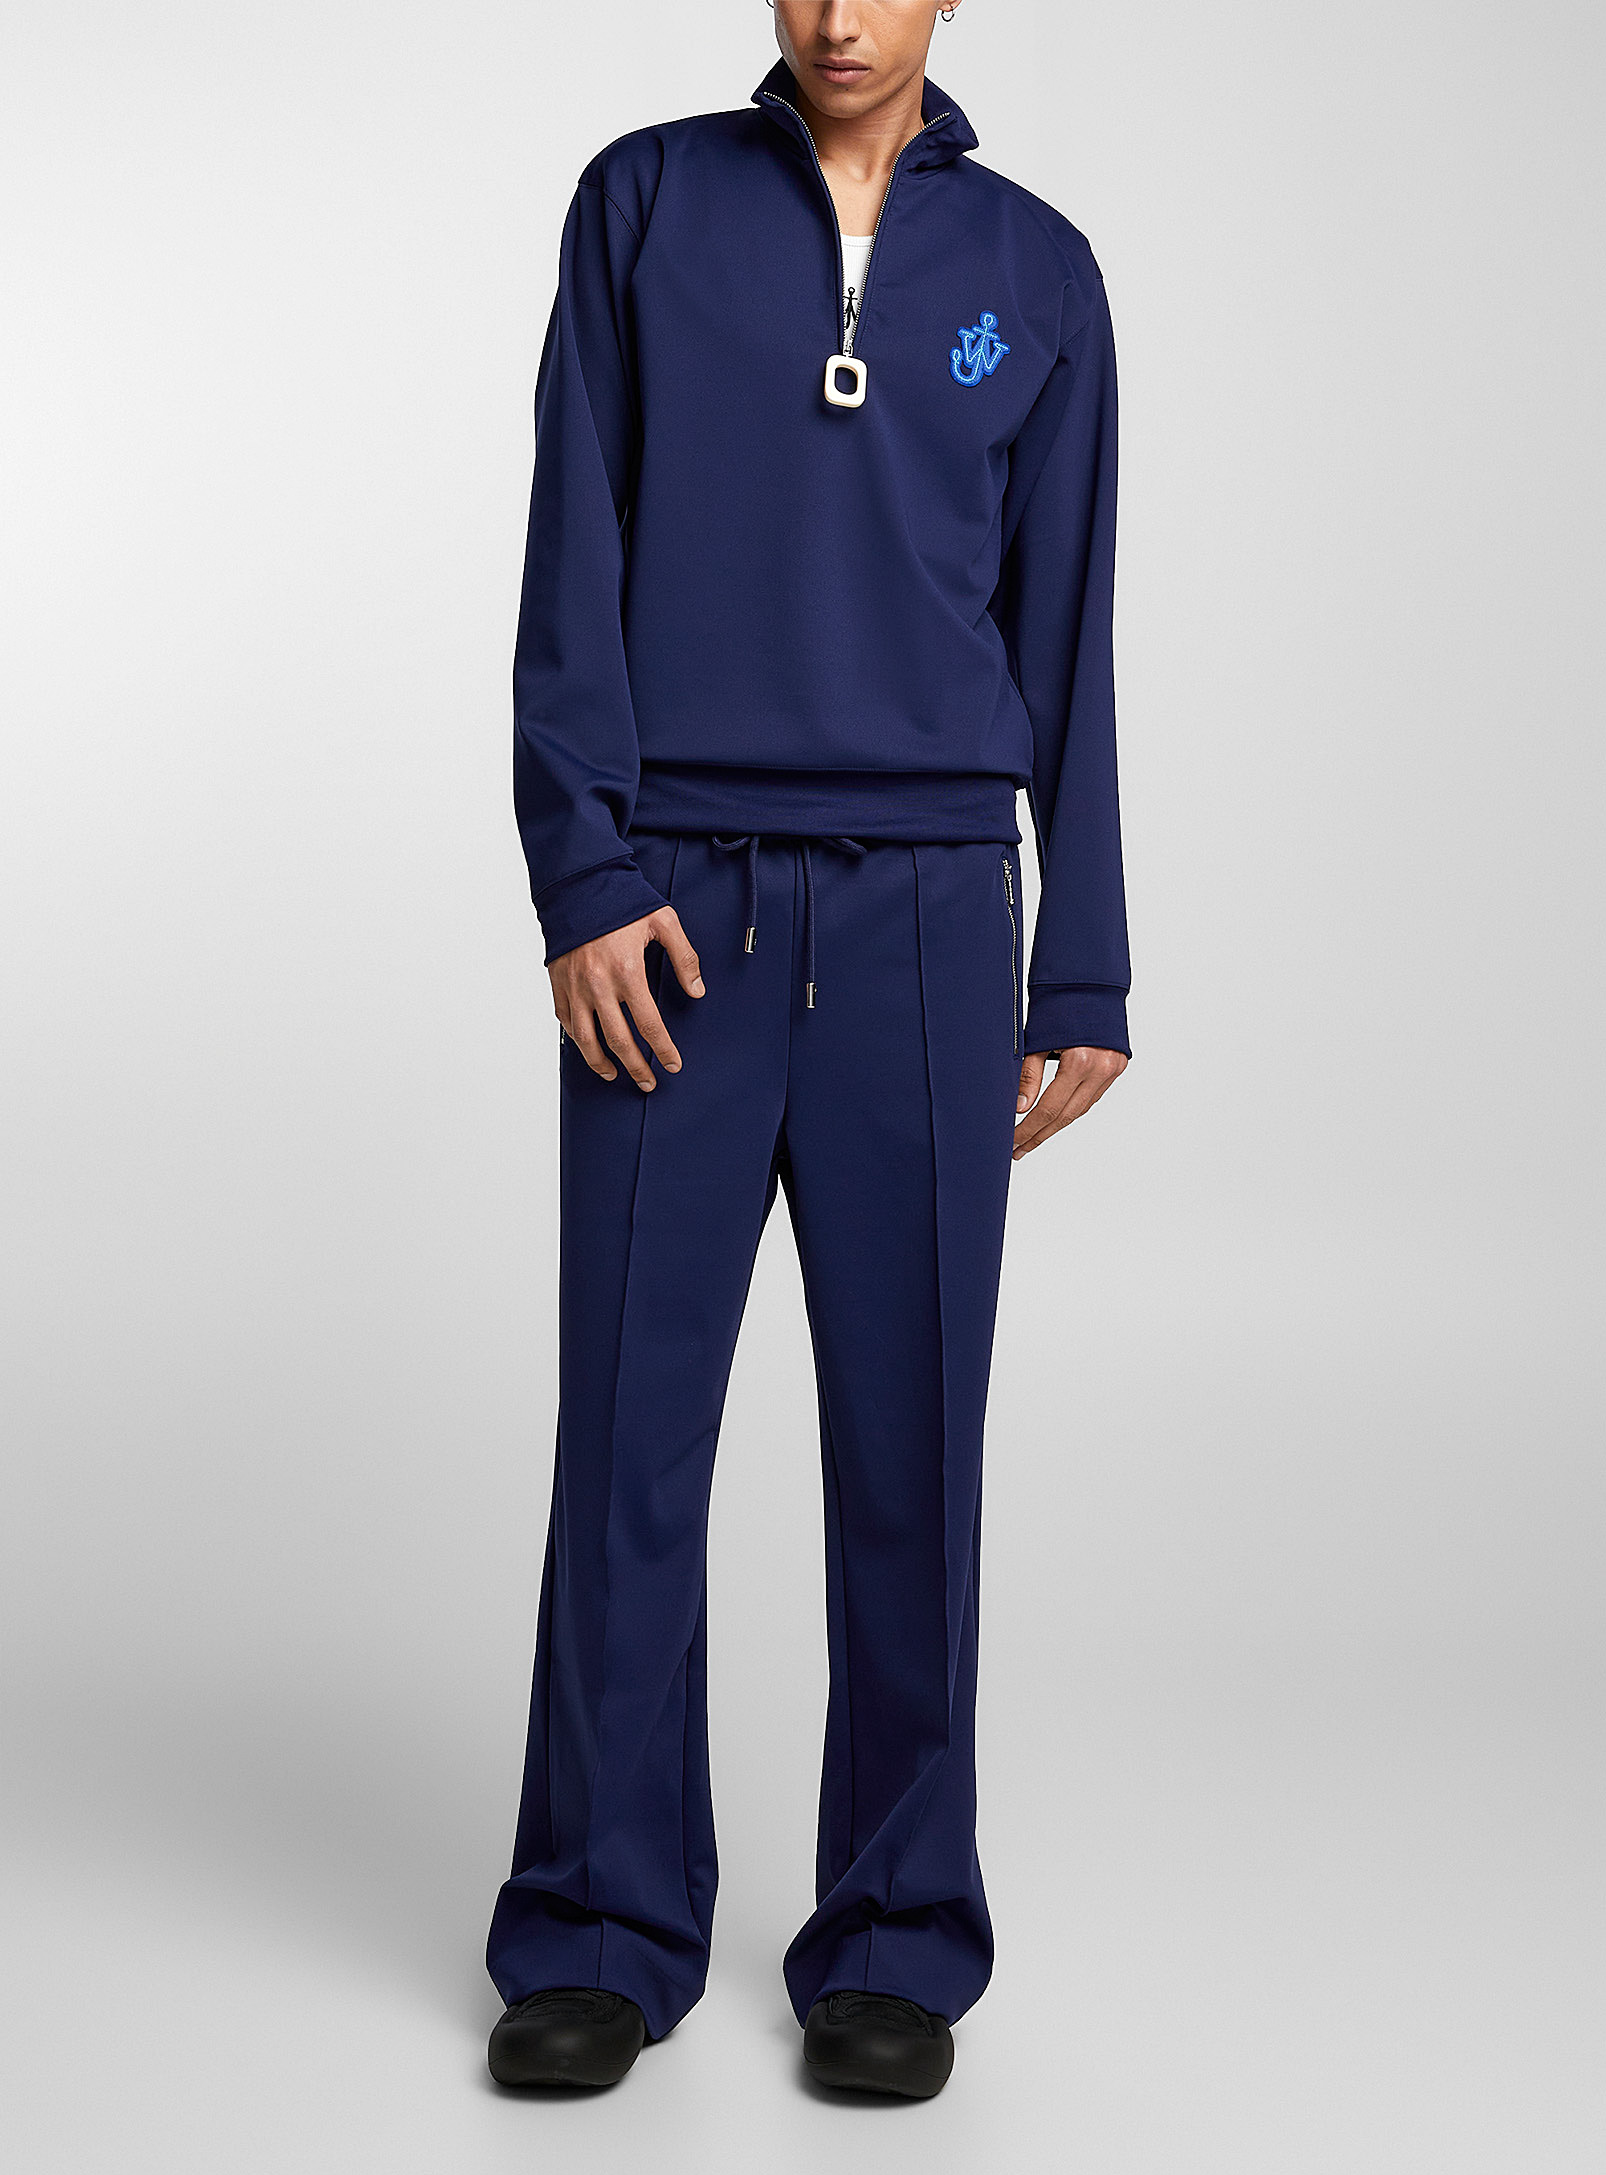 JW Anderson - Men's Pleated blue jogger